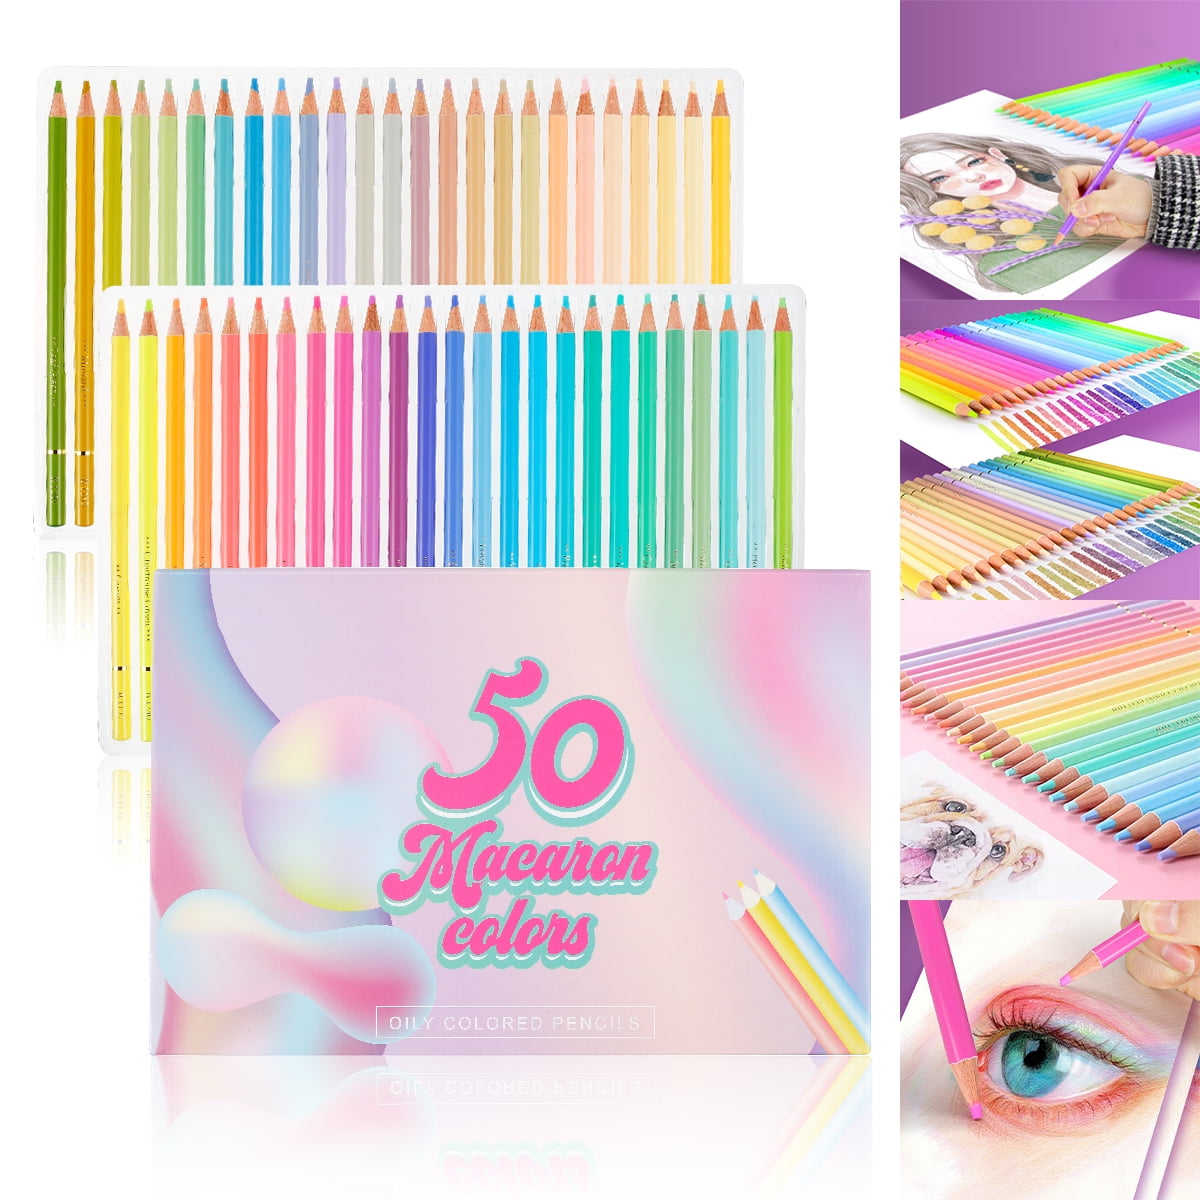  Colored Pencils Color Pencil Set For Adult Coloring Book  Gifts For Kids & Adults 50 Count